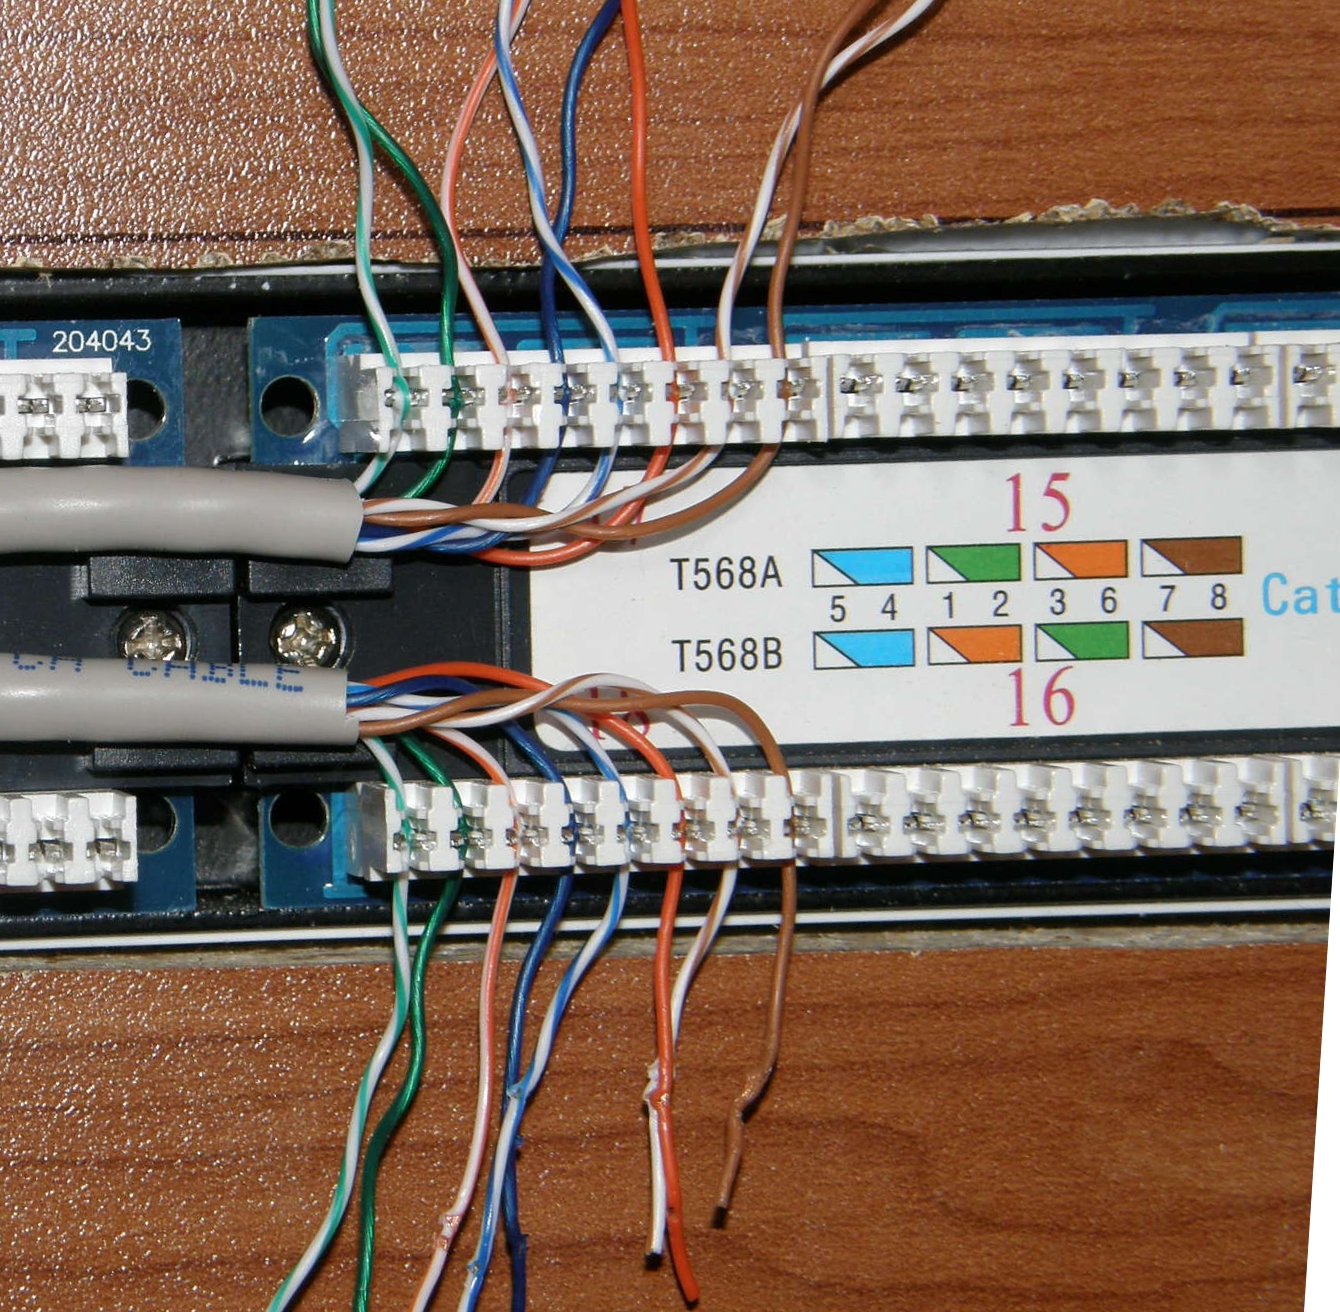 In Case You Need To Know ...: Wiring up a Home Network Patch Panel